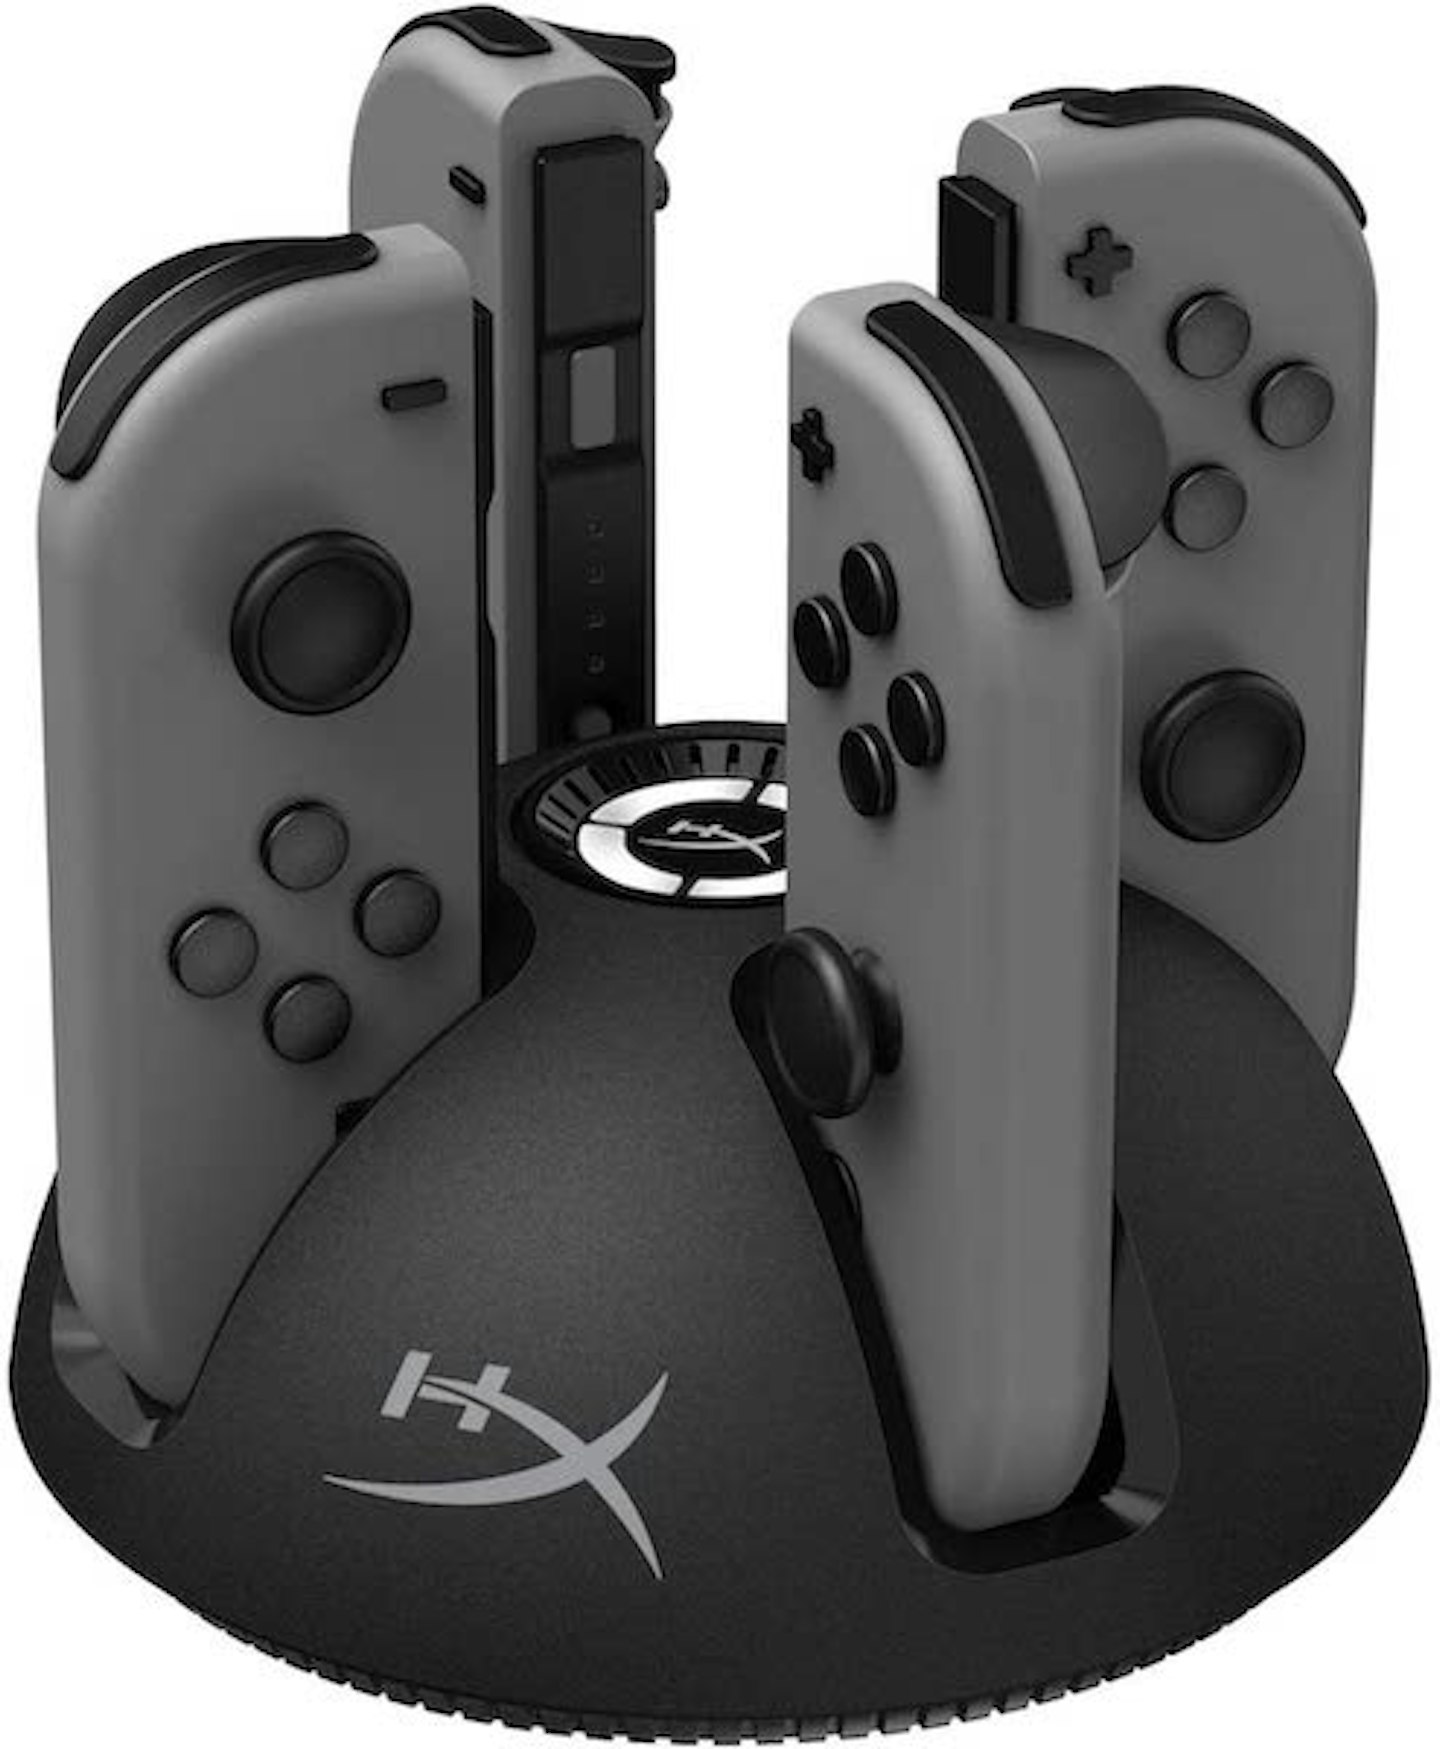 HyperX Chargeplay Quad Joy-Con Charging Station